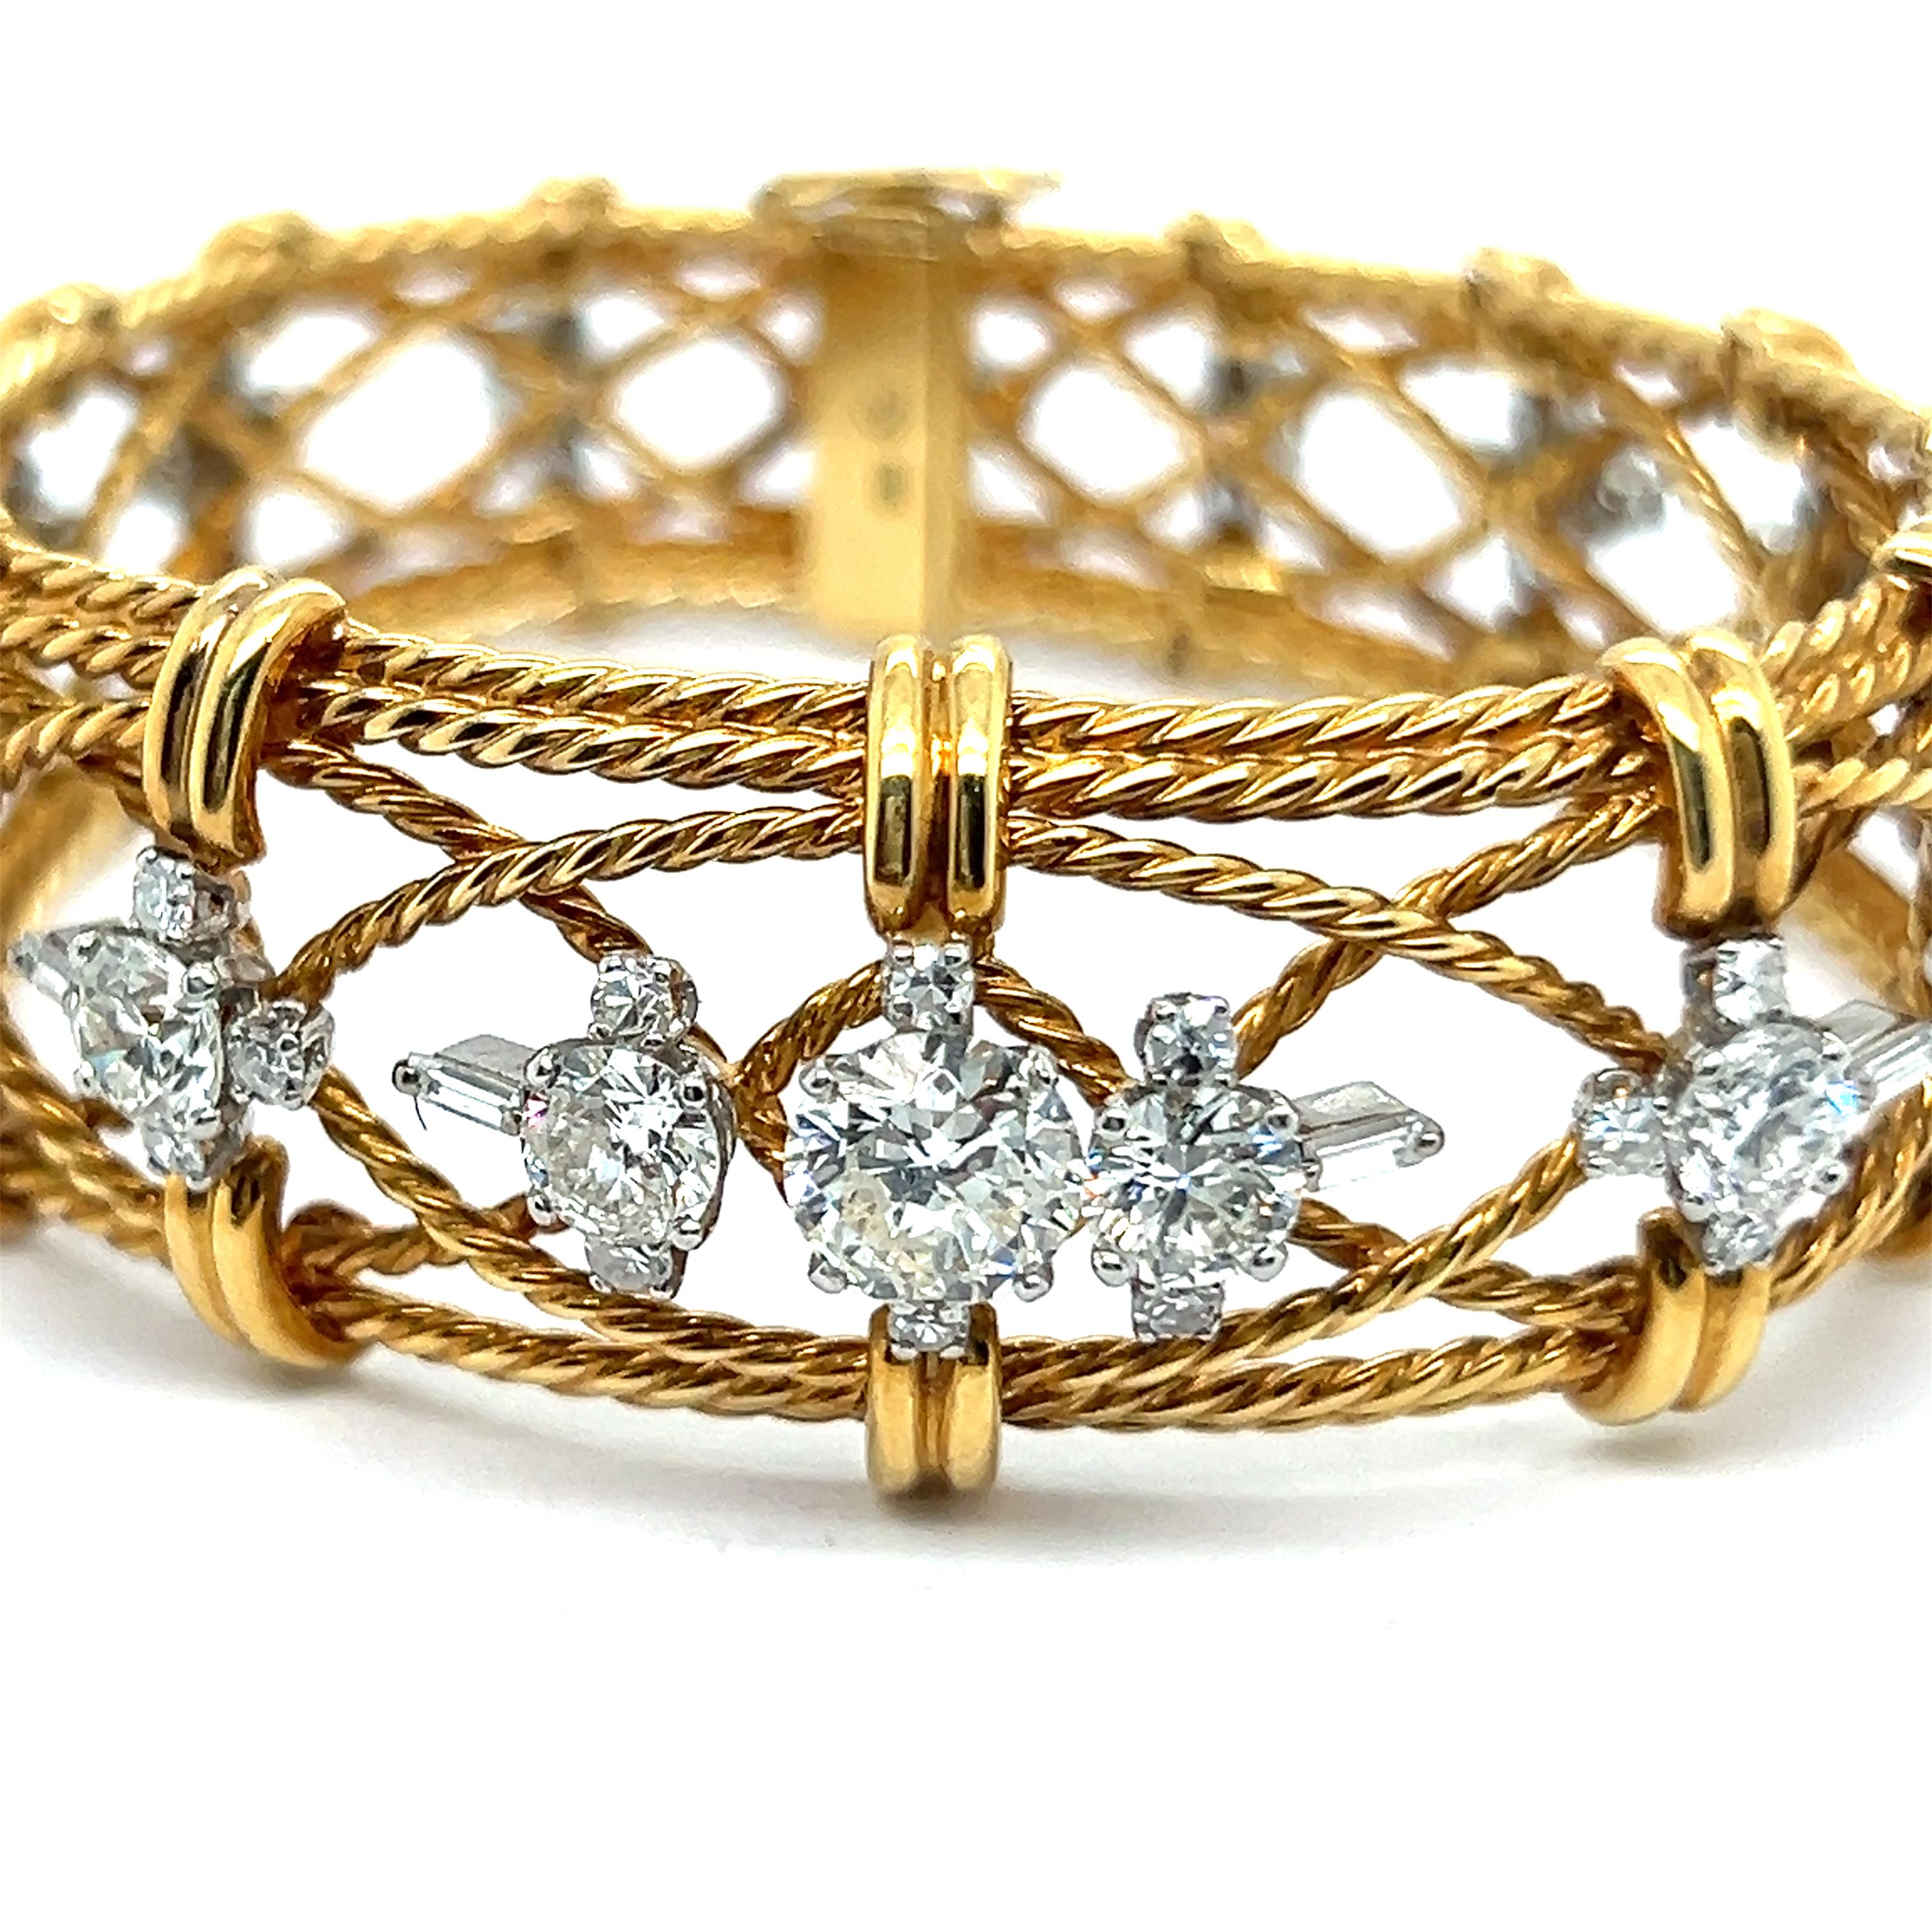 Bracelet with Diamonds in 18 Karat Gold by Gübelin

Embrace the allure of the Gübelin Bracelet, a testament to refined elegance. 

Crafted from 18 Karat yellow gold, its intricate braided frame exudes sophistication. Encrusted with diamonds of